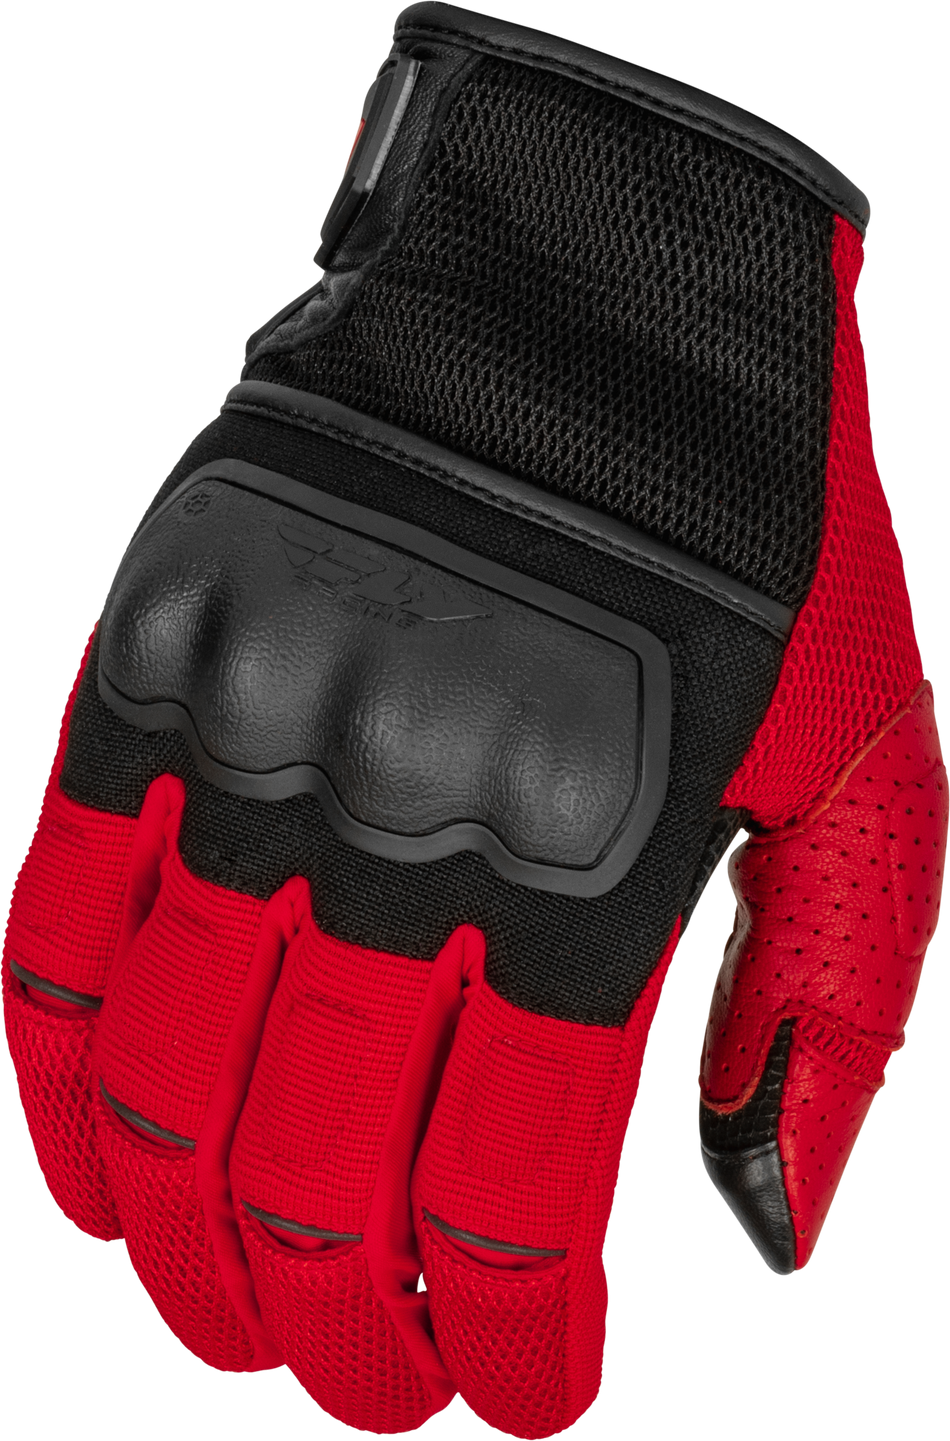 FLY RACING Coolpro Force Gloves Black/Red Sm 476-4129S